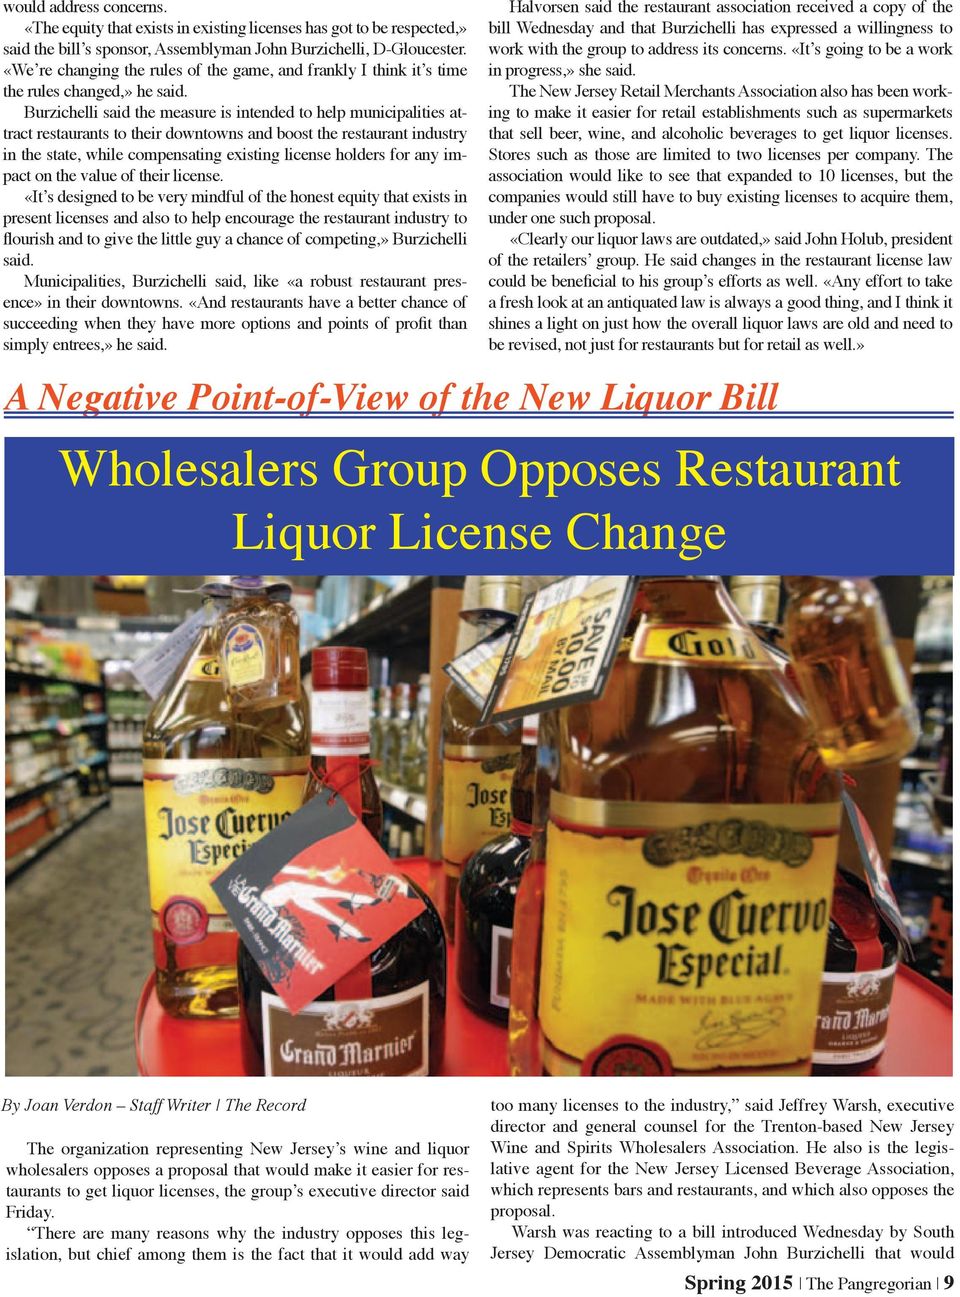 Burzichelli said the measure is intended to help municipalities attract restaurants to their downtowns and boost the restaurant industry in the state, while compensating existing license holders for